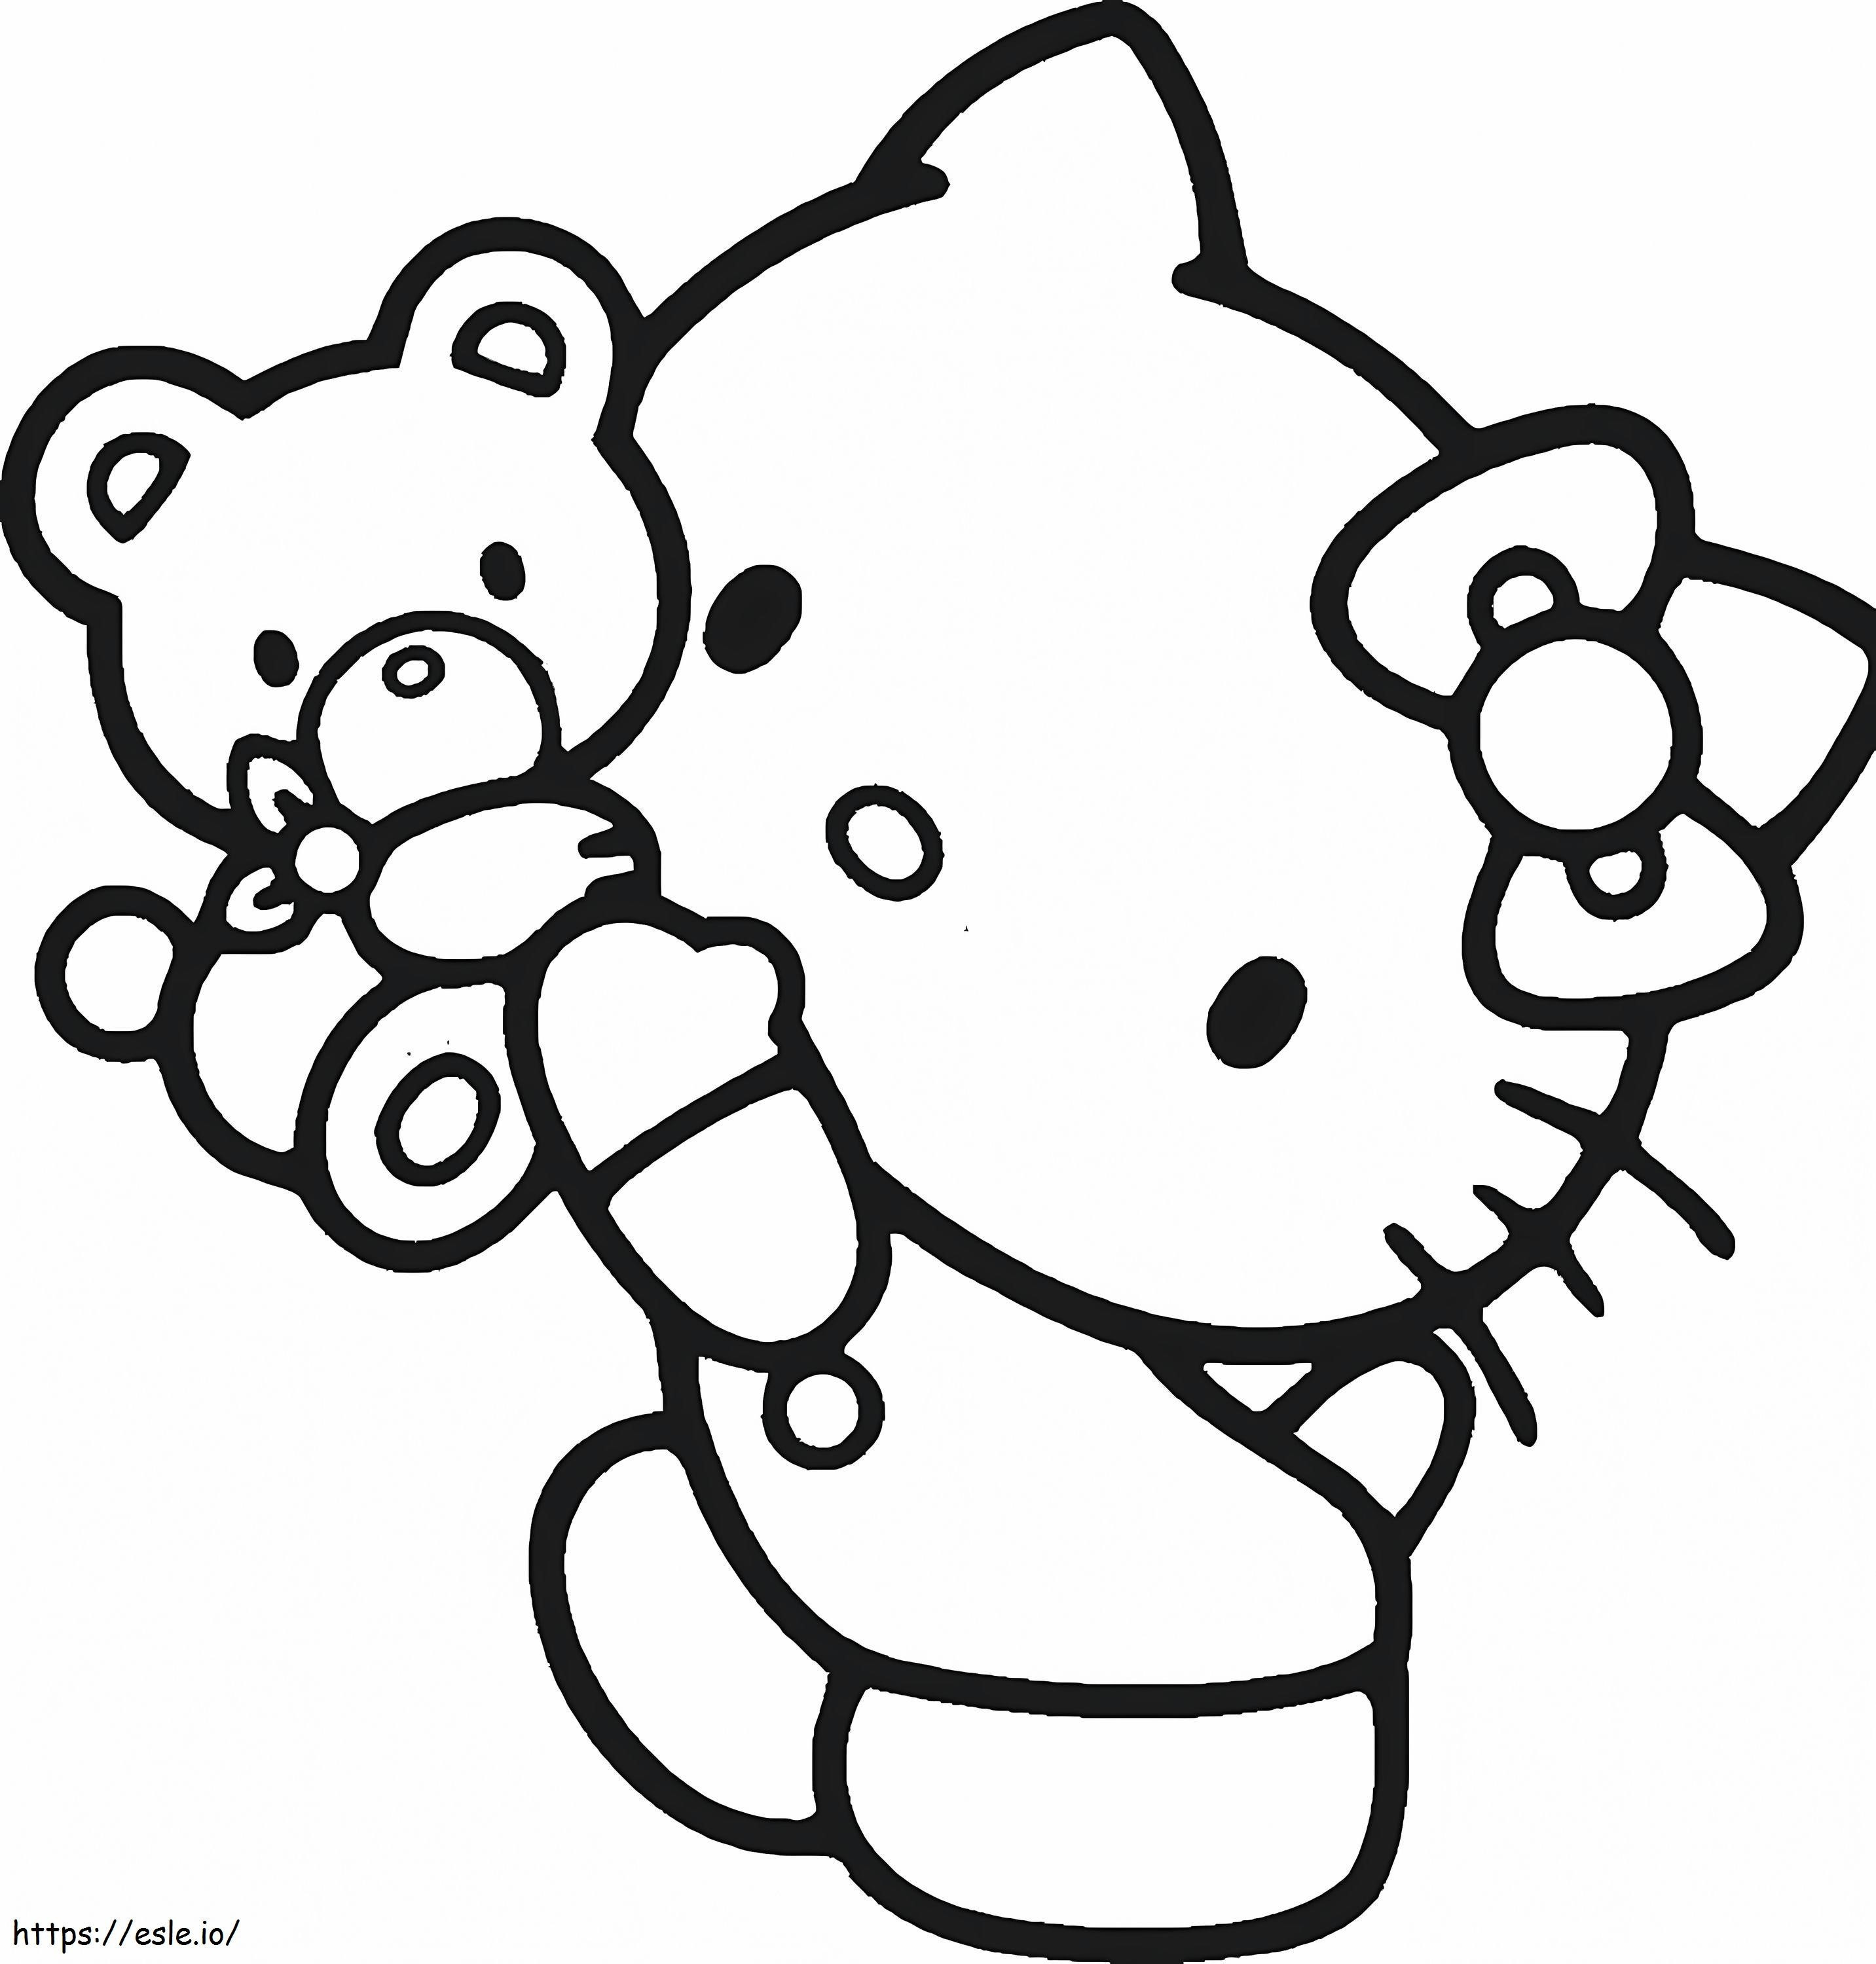 Hello Kitty With Teddy Bear coloring page